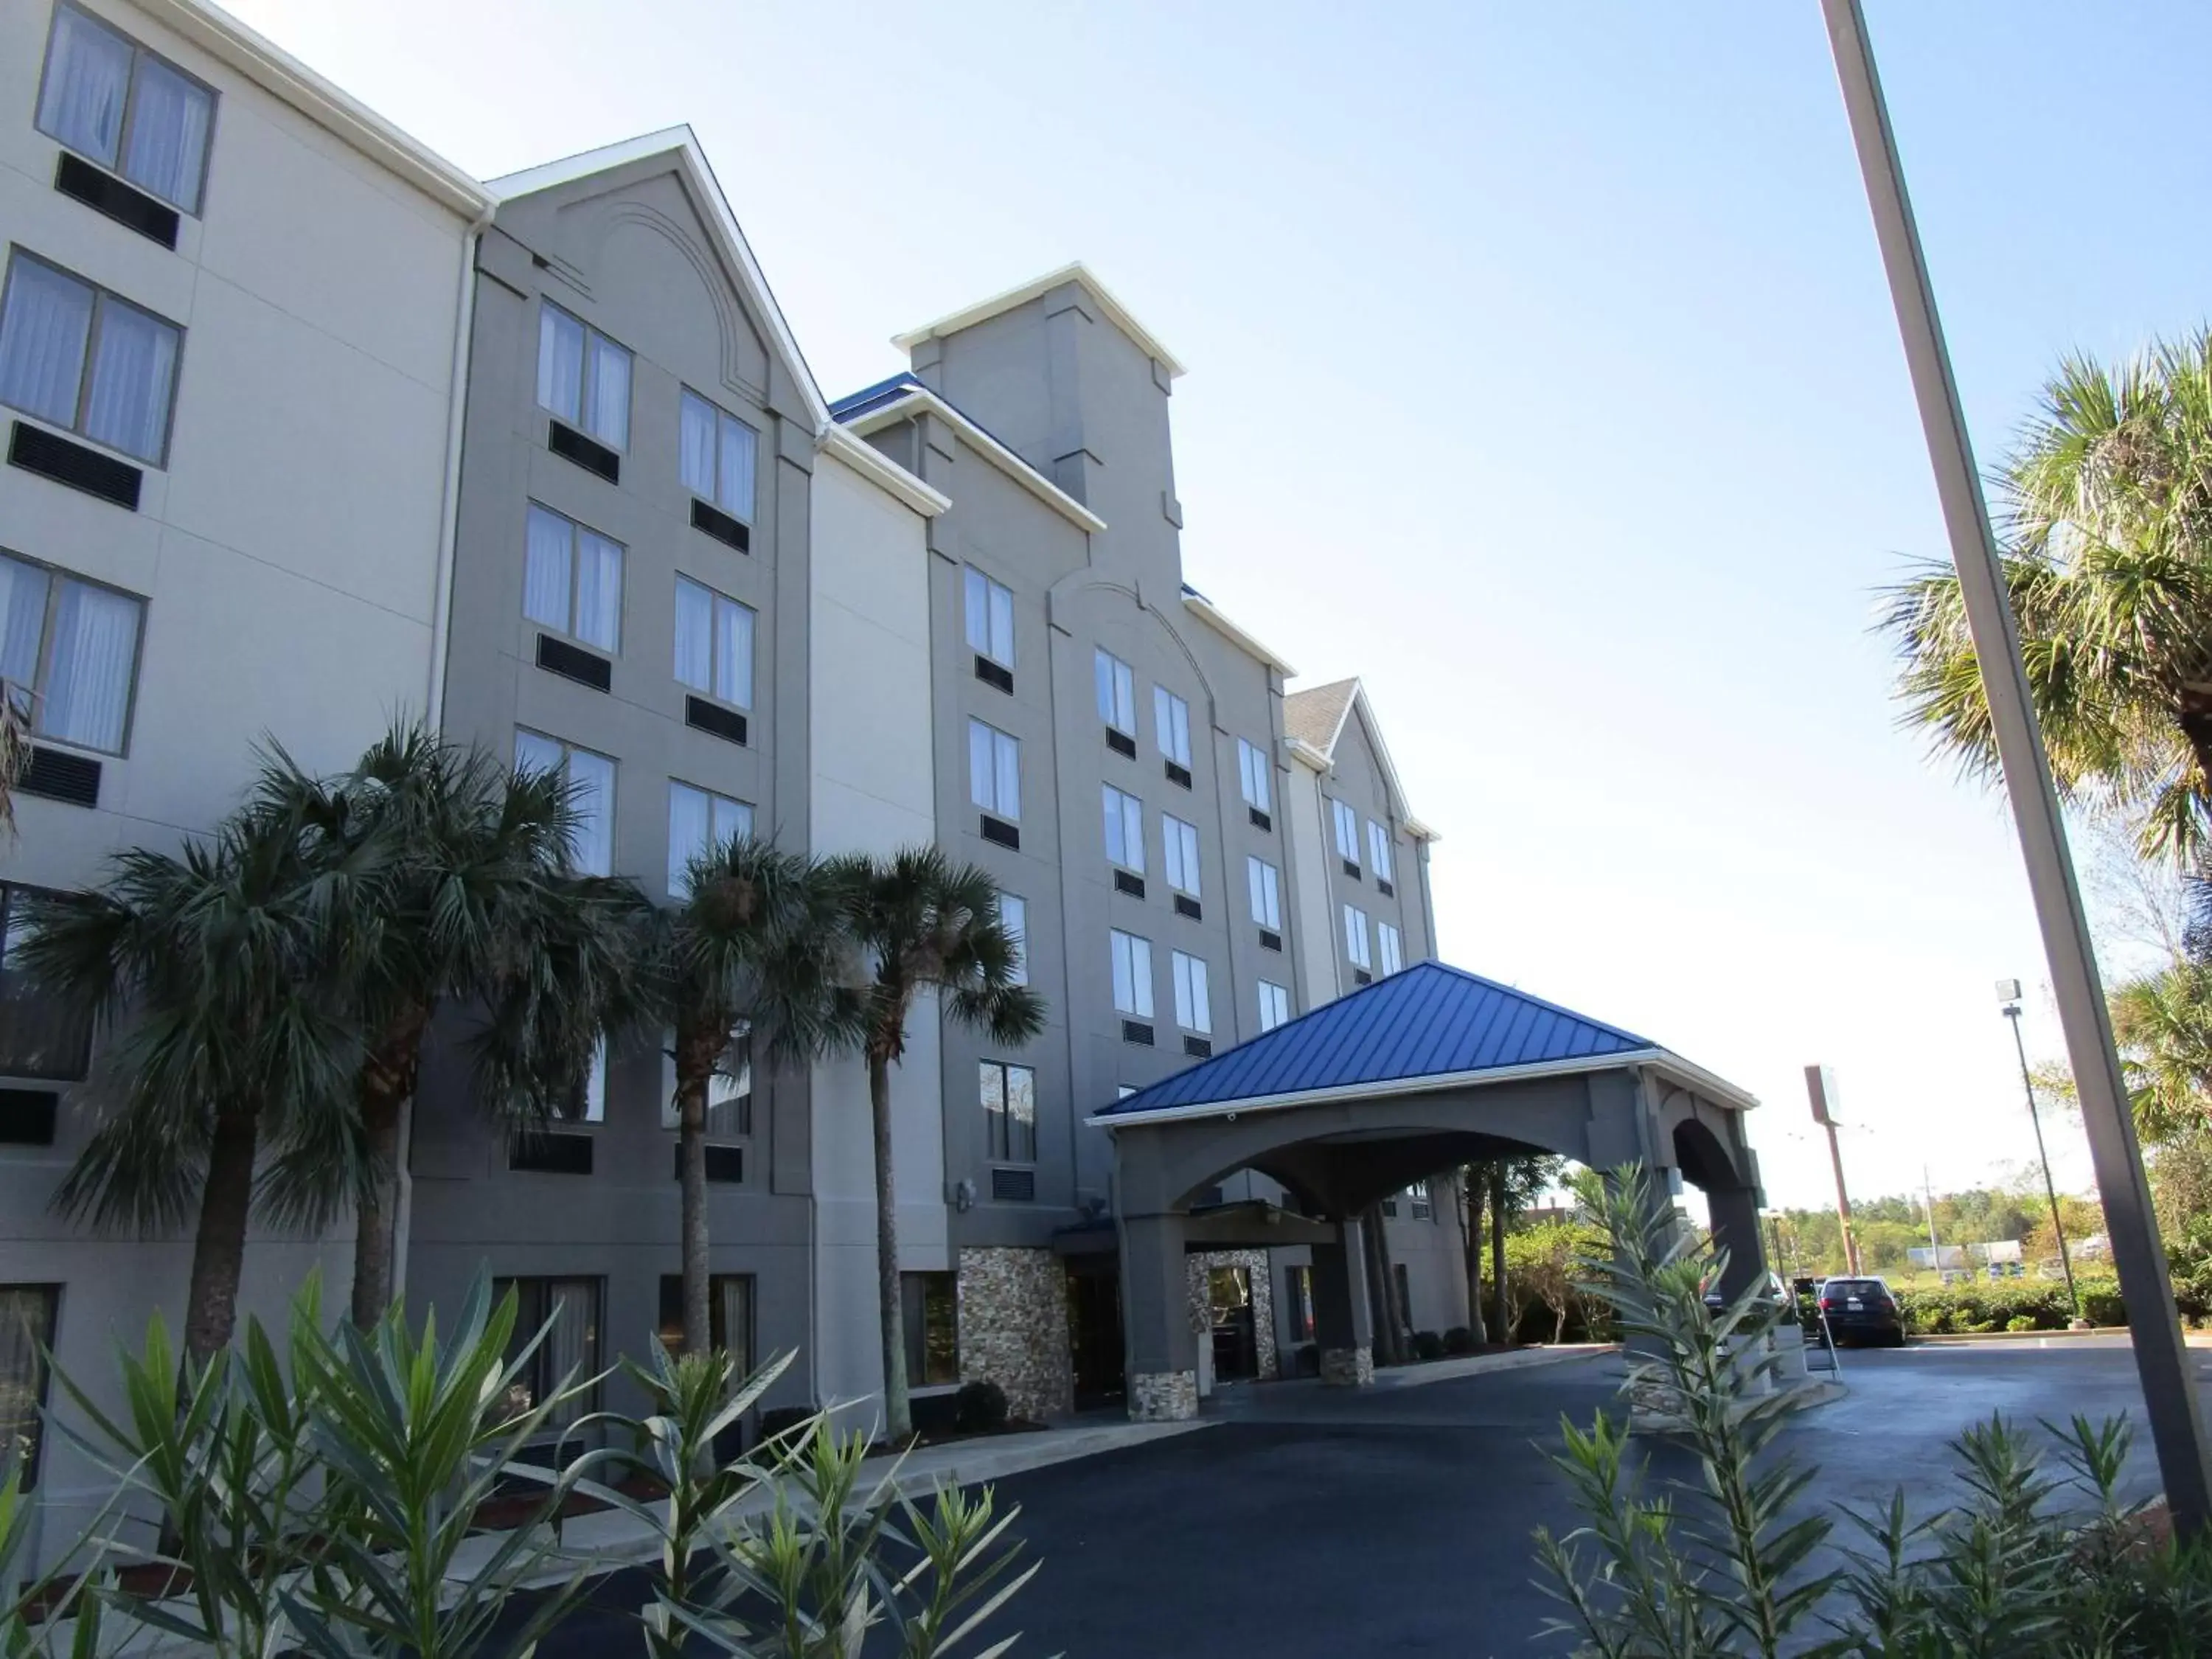 Property Building in Country Inn & Suites, Murrells Inlet, SC